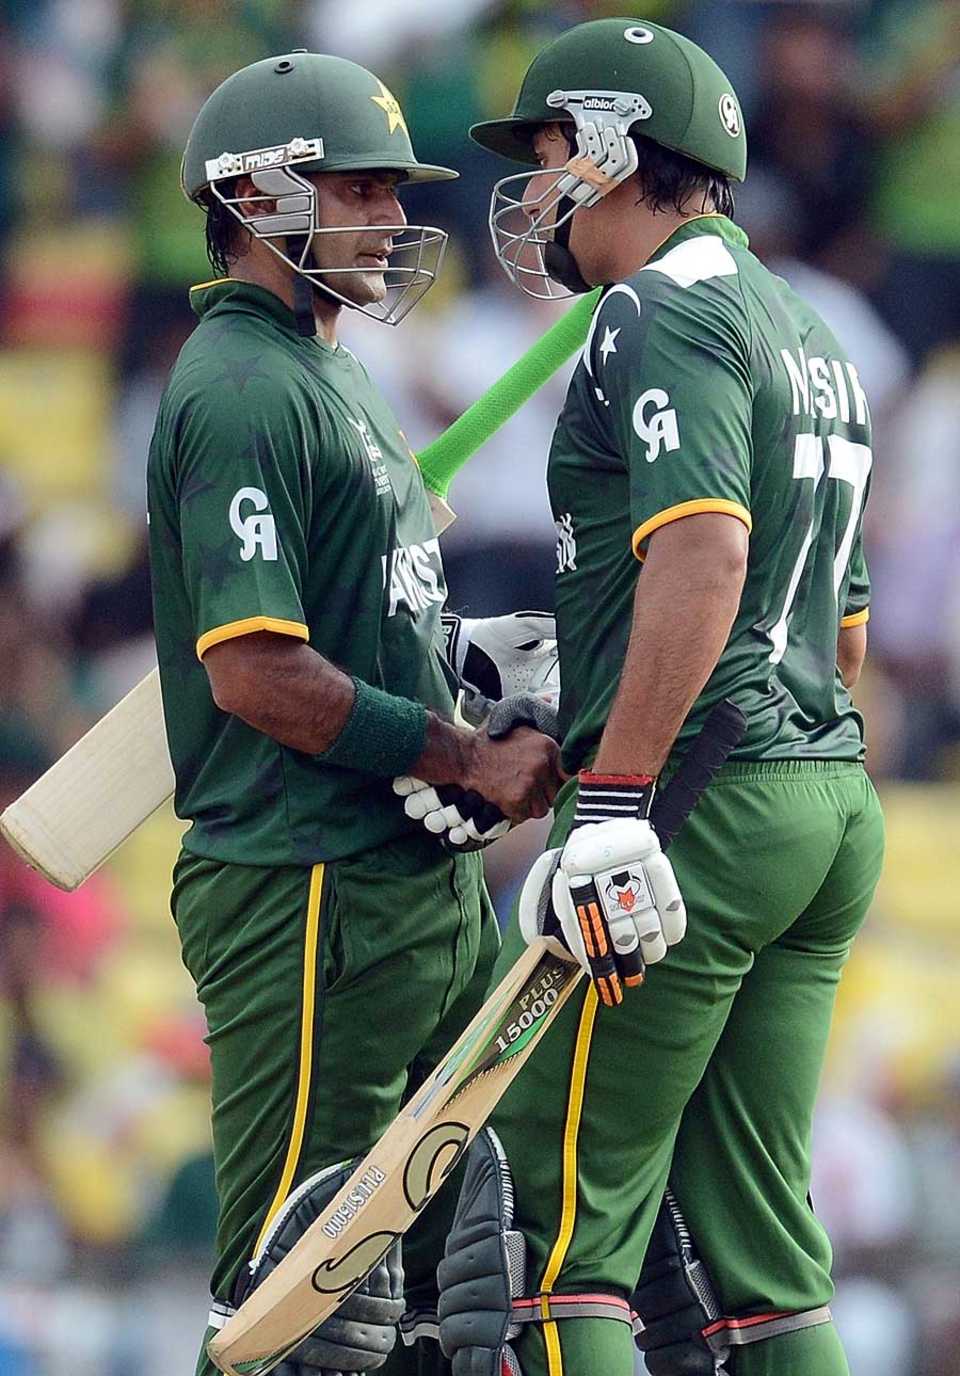 Mohammad Hafeez and Nasir Jamshed were involved in a 76-run stand, New Zealand v Pakistan, World T20 2012, Group D, Pallekele, September, 23, 2012